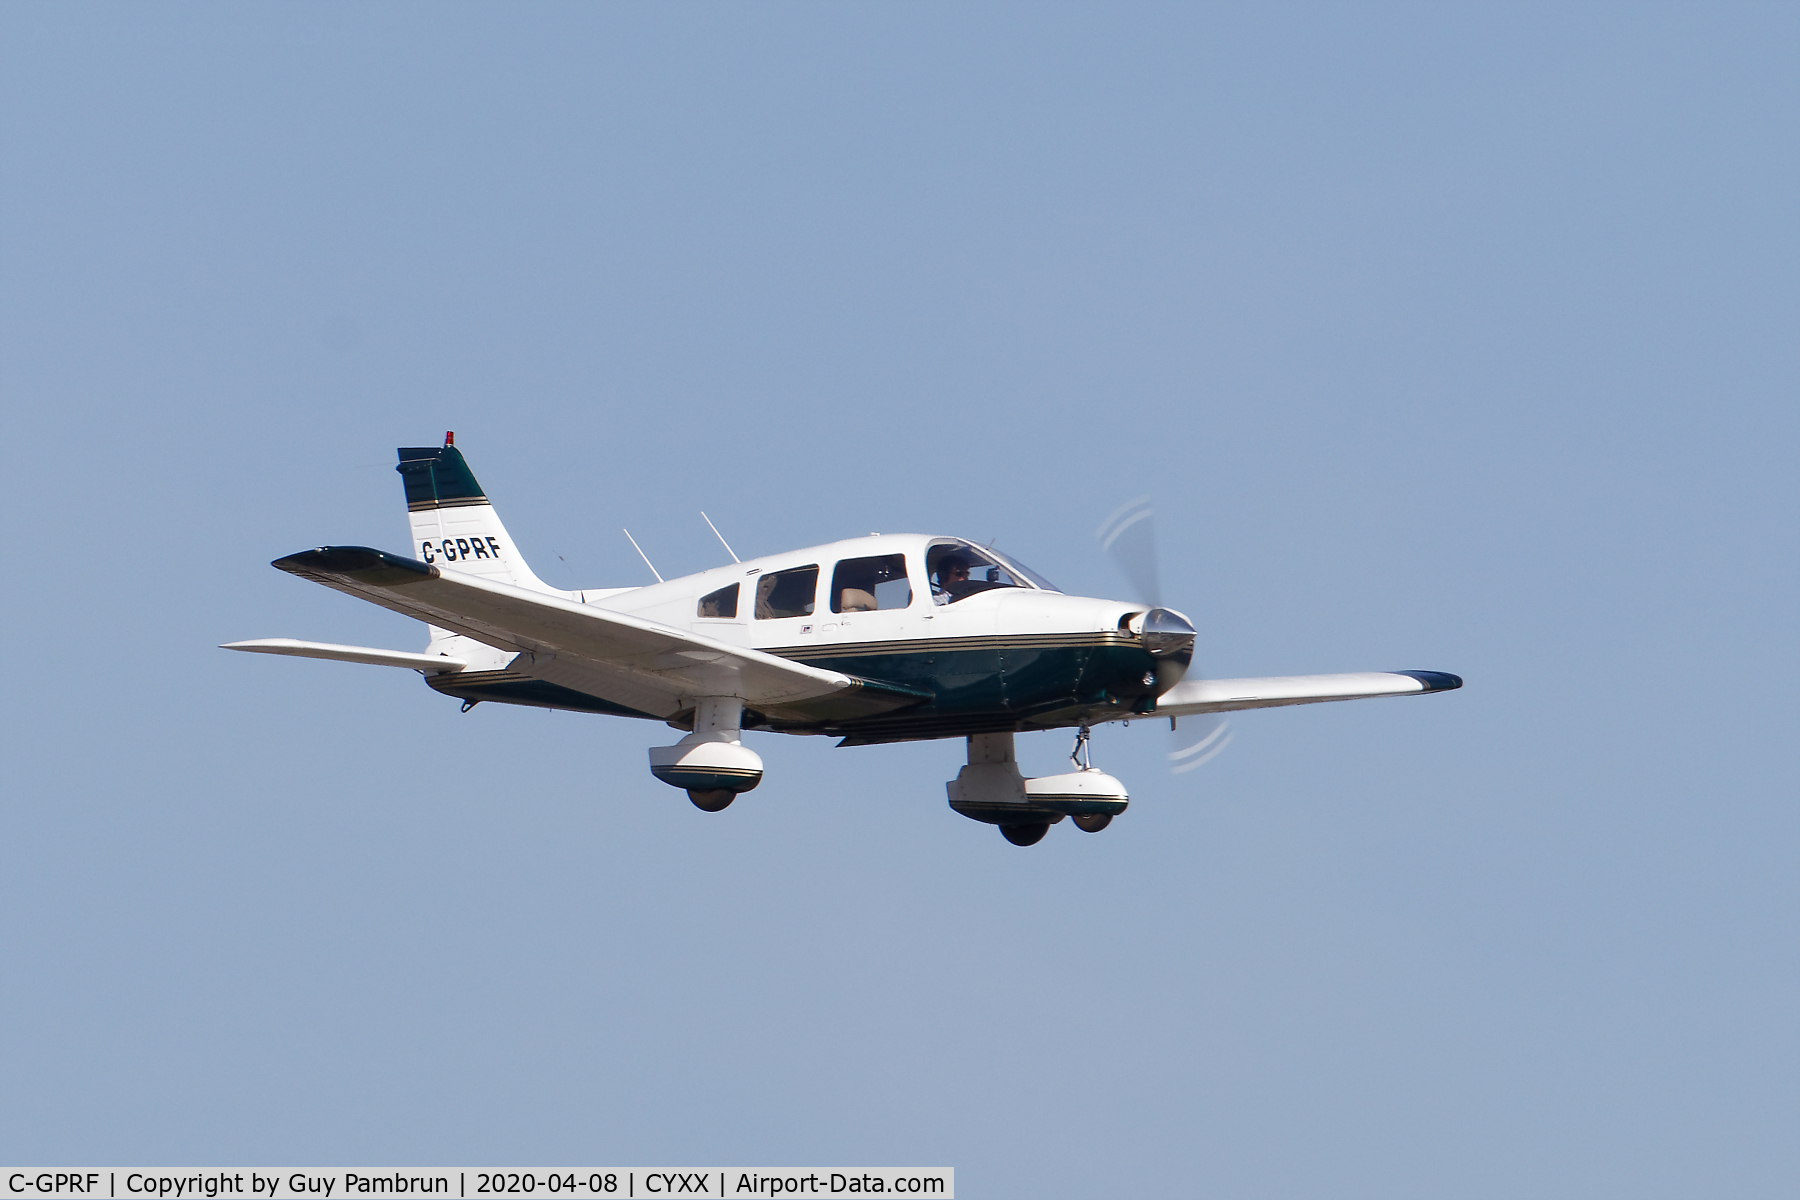 C-GPRF, 1981 Piper PA-28-161 C/N 28-8116070, Short final for 19